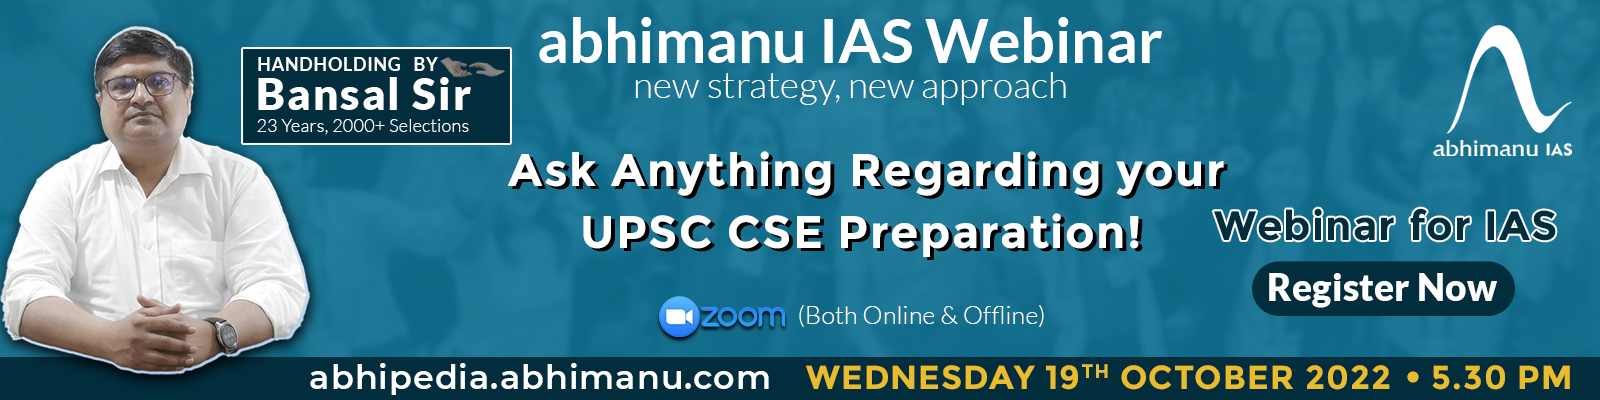 6 Simple but Effective Steps to start IAS Preparation by Bansal Sir , Founder abhimanu ias 